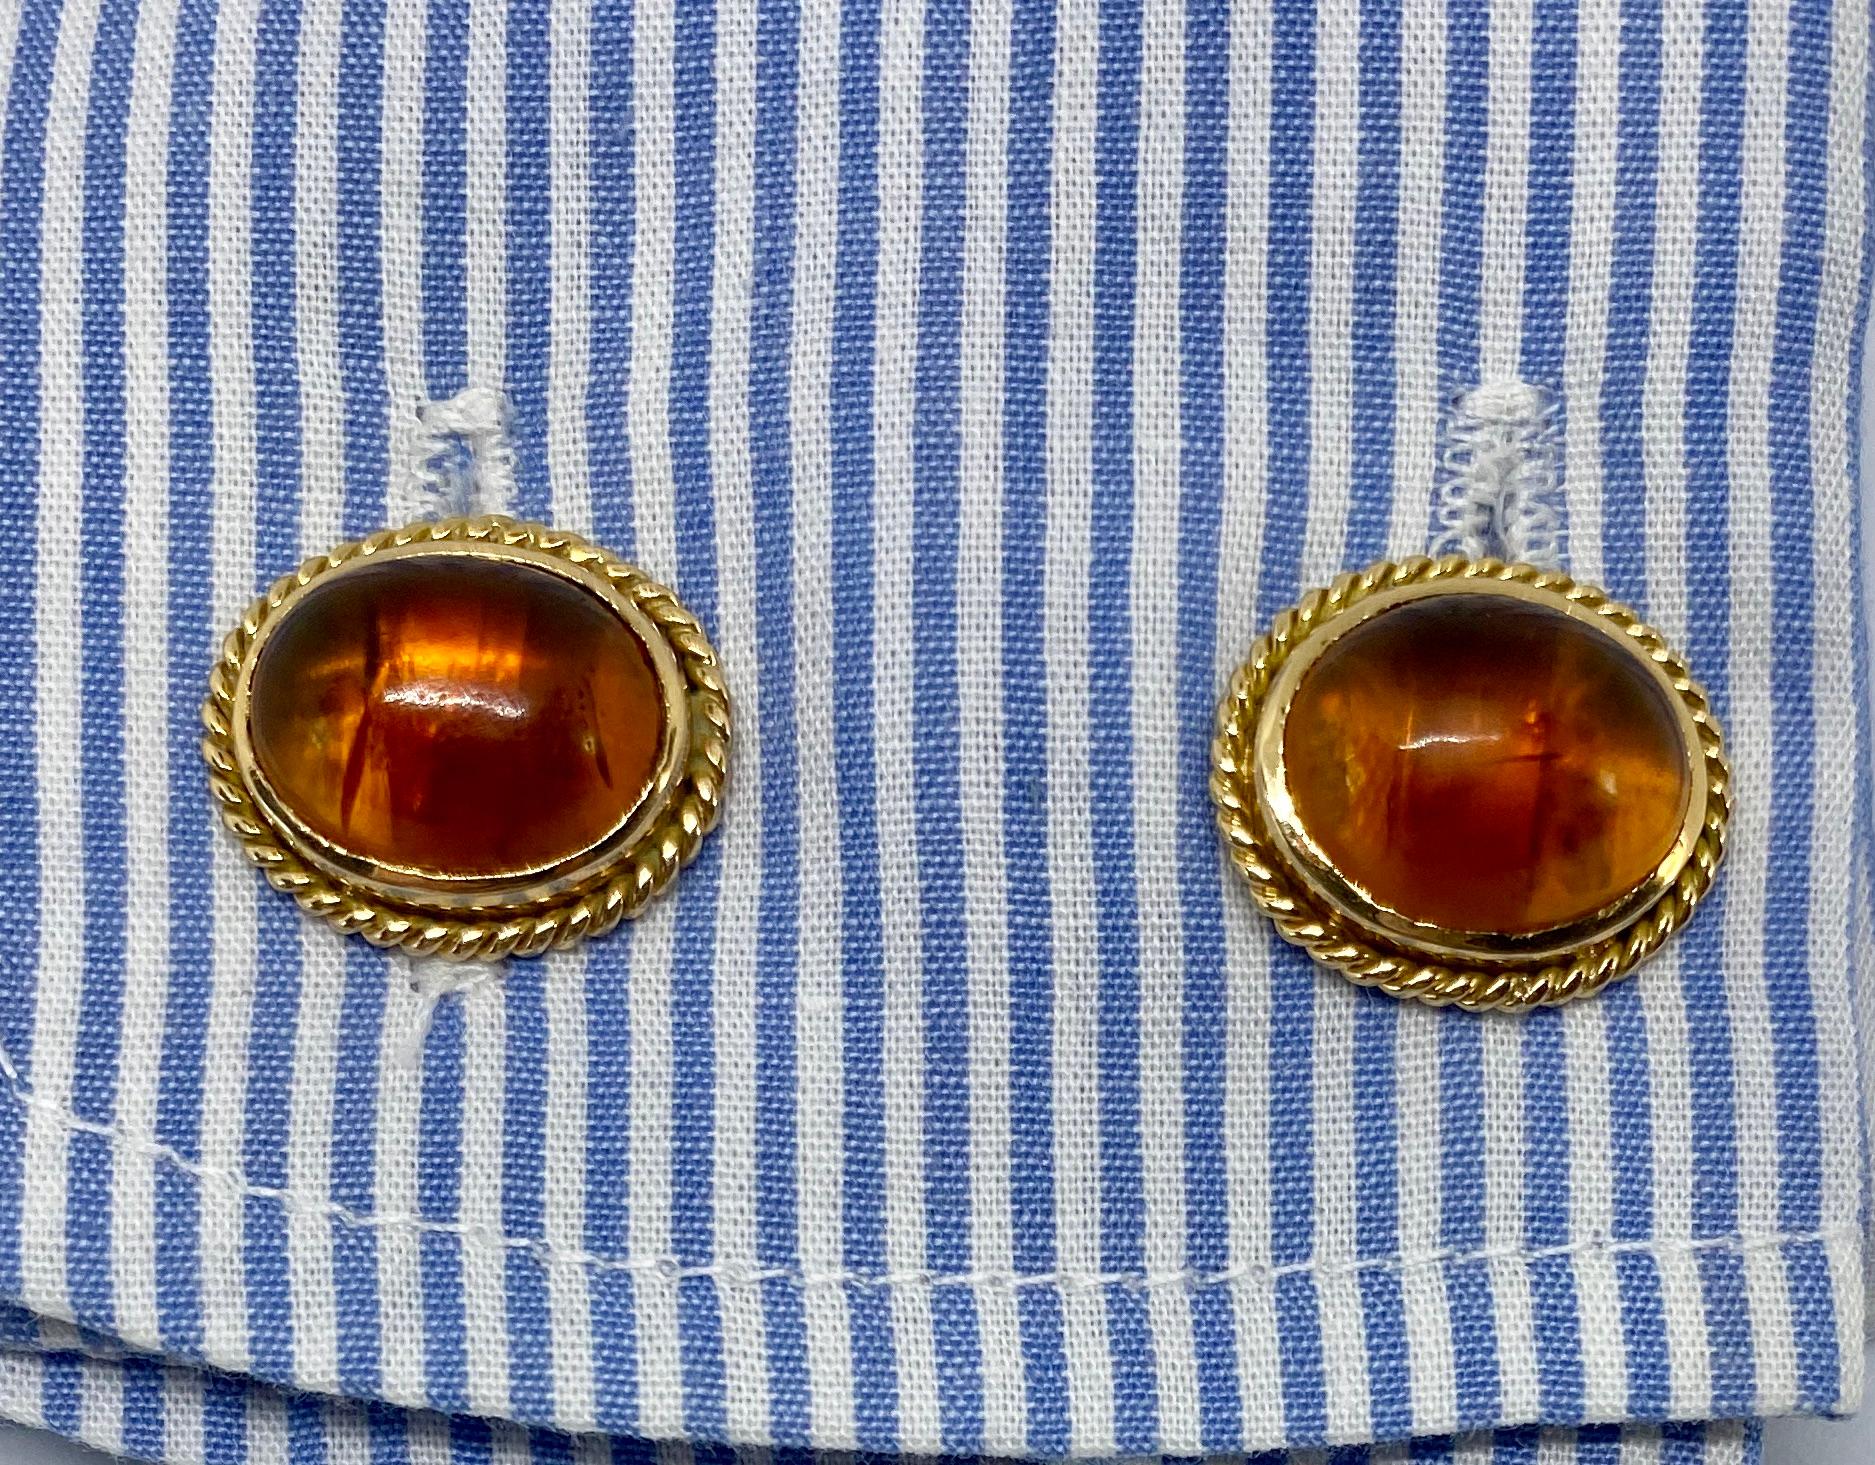 These beautiful, double-sided cufflinks feature four large amber cabochons set in solid 18K yellow gold with twisted rope detail. The amber is very high quality - bug-free and slightly cloudy from age - with a rich, 